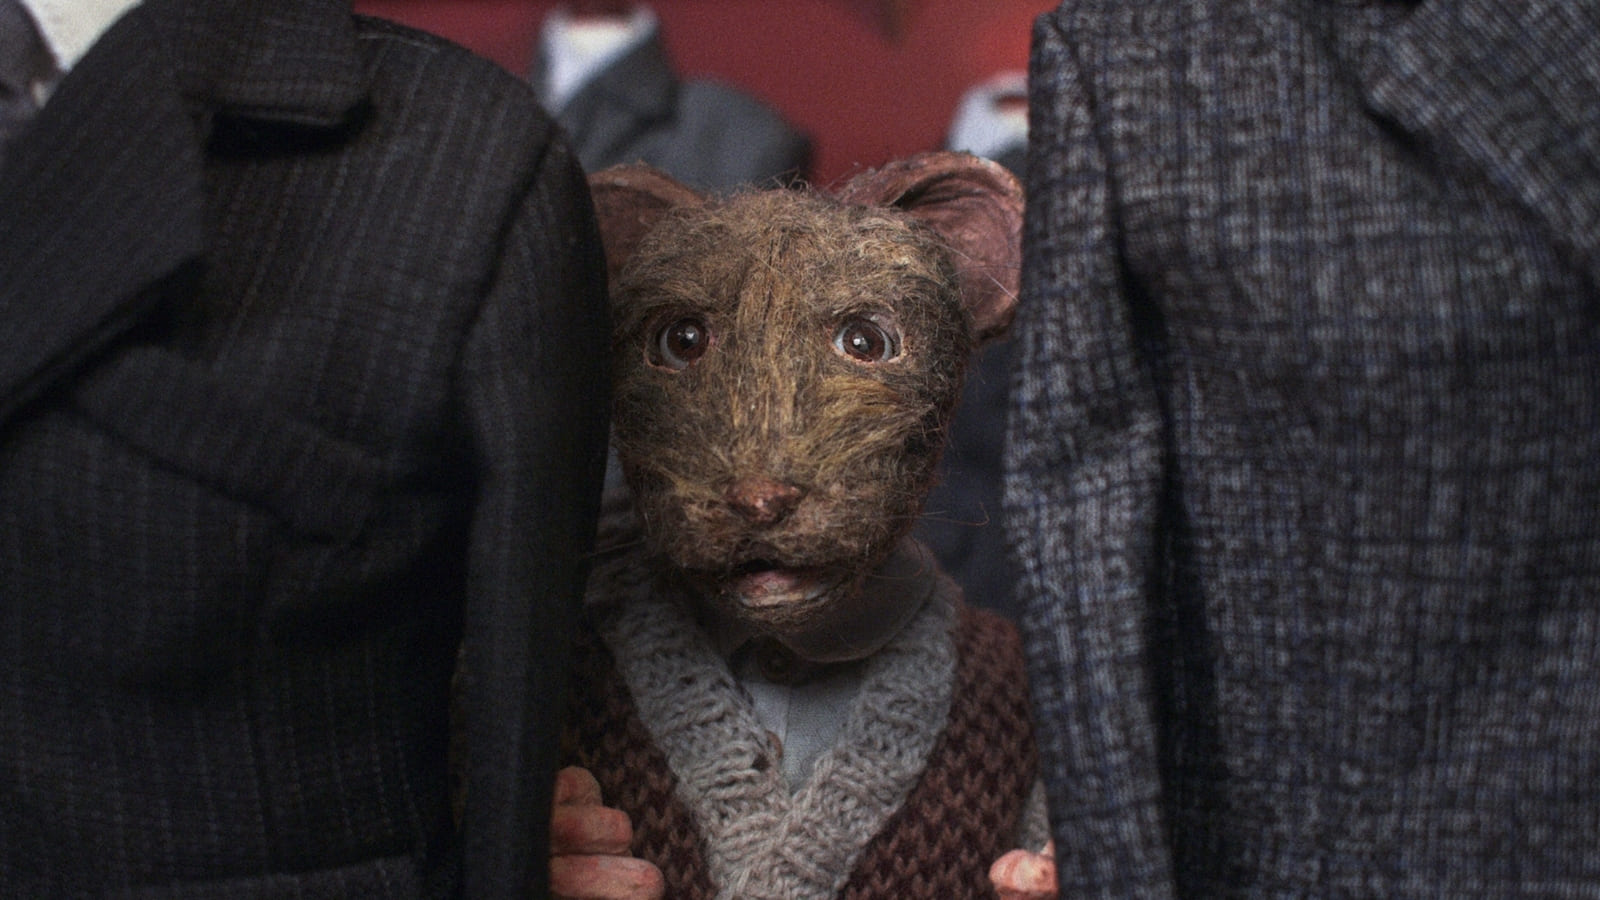 An animated mouse looks up between two suits in a tailor shop